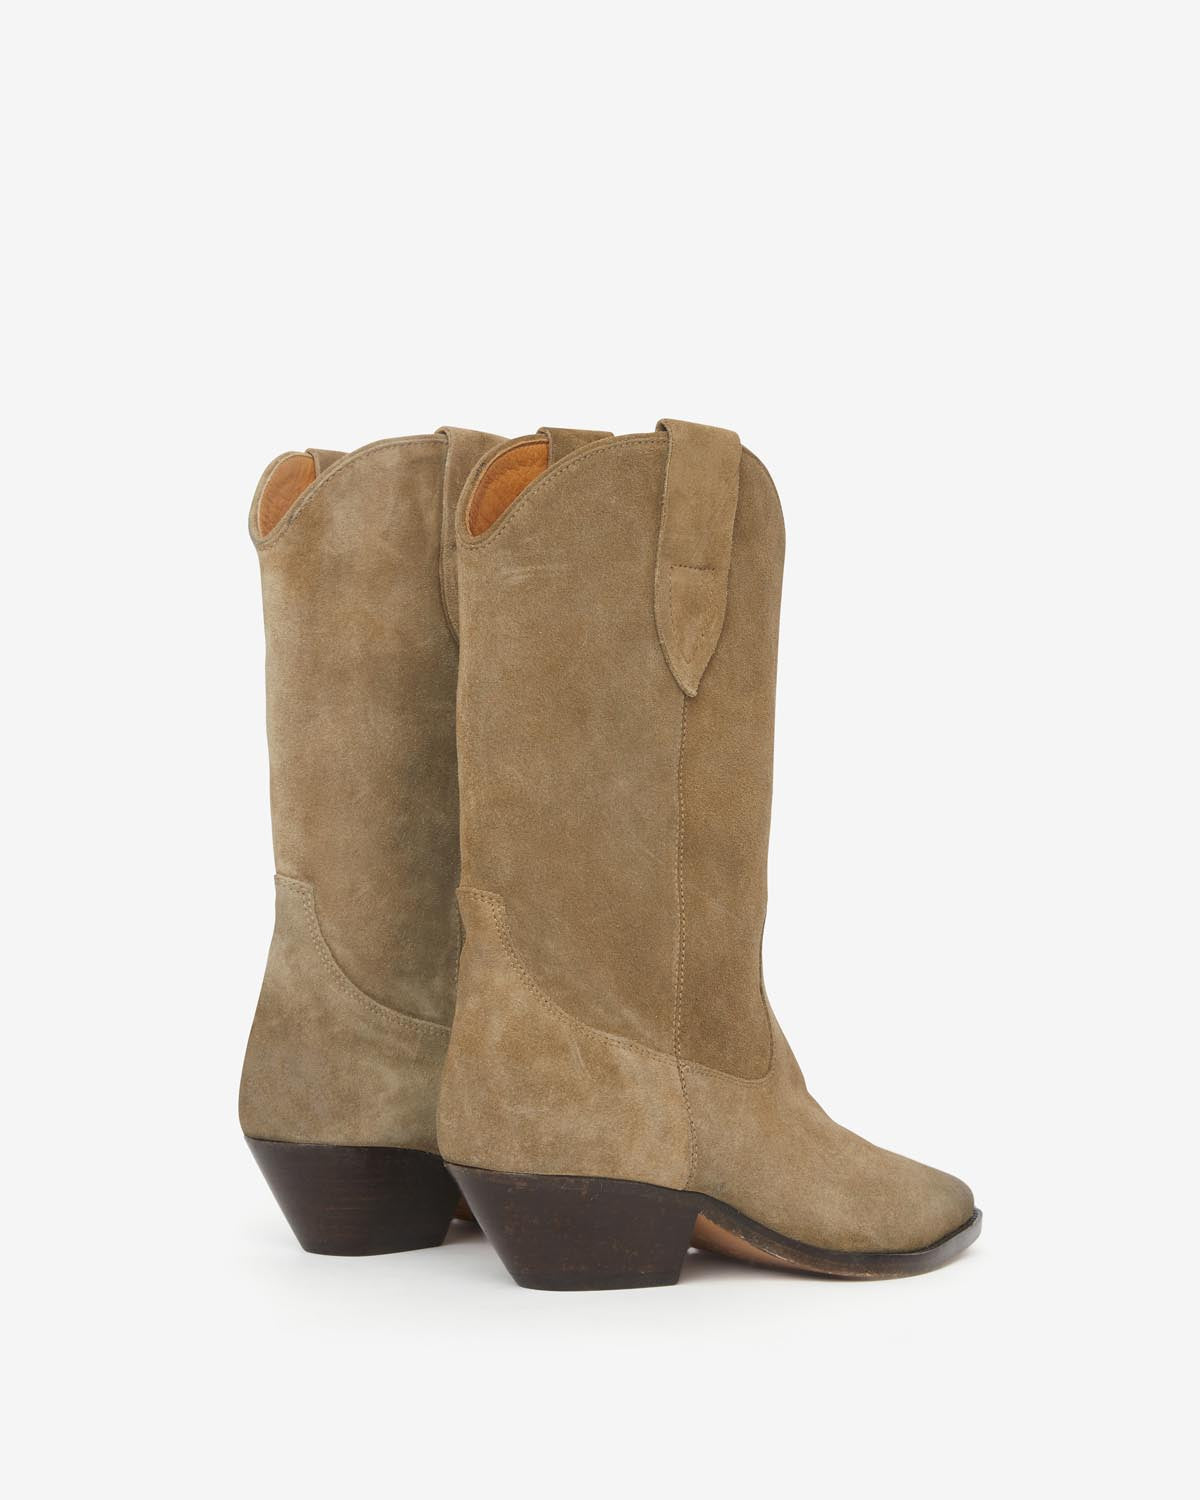 Duerto Cowboy Boots Woman taupe | ISABEL MARANT Official online store